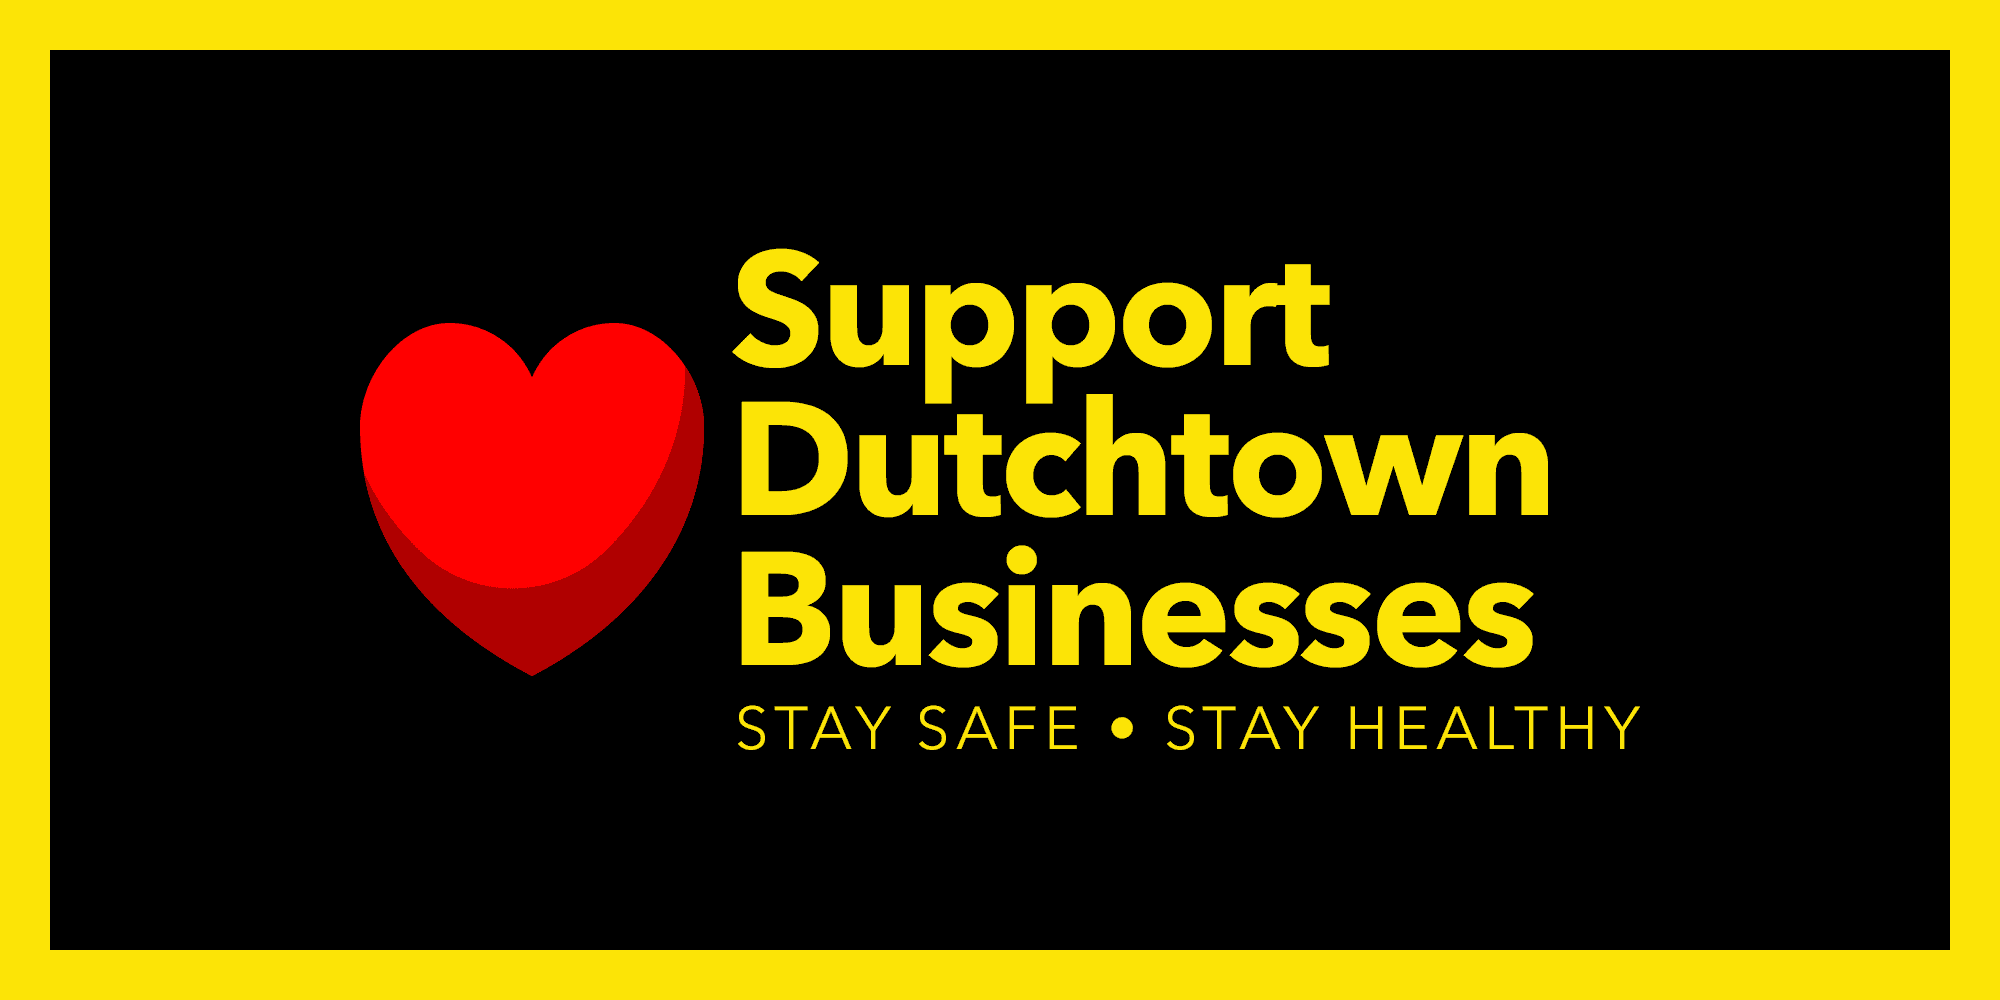 Support Dutchtown businesses. Stay safe, stay healthy.